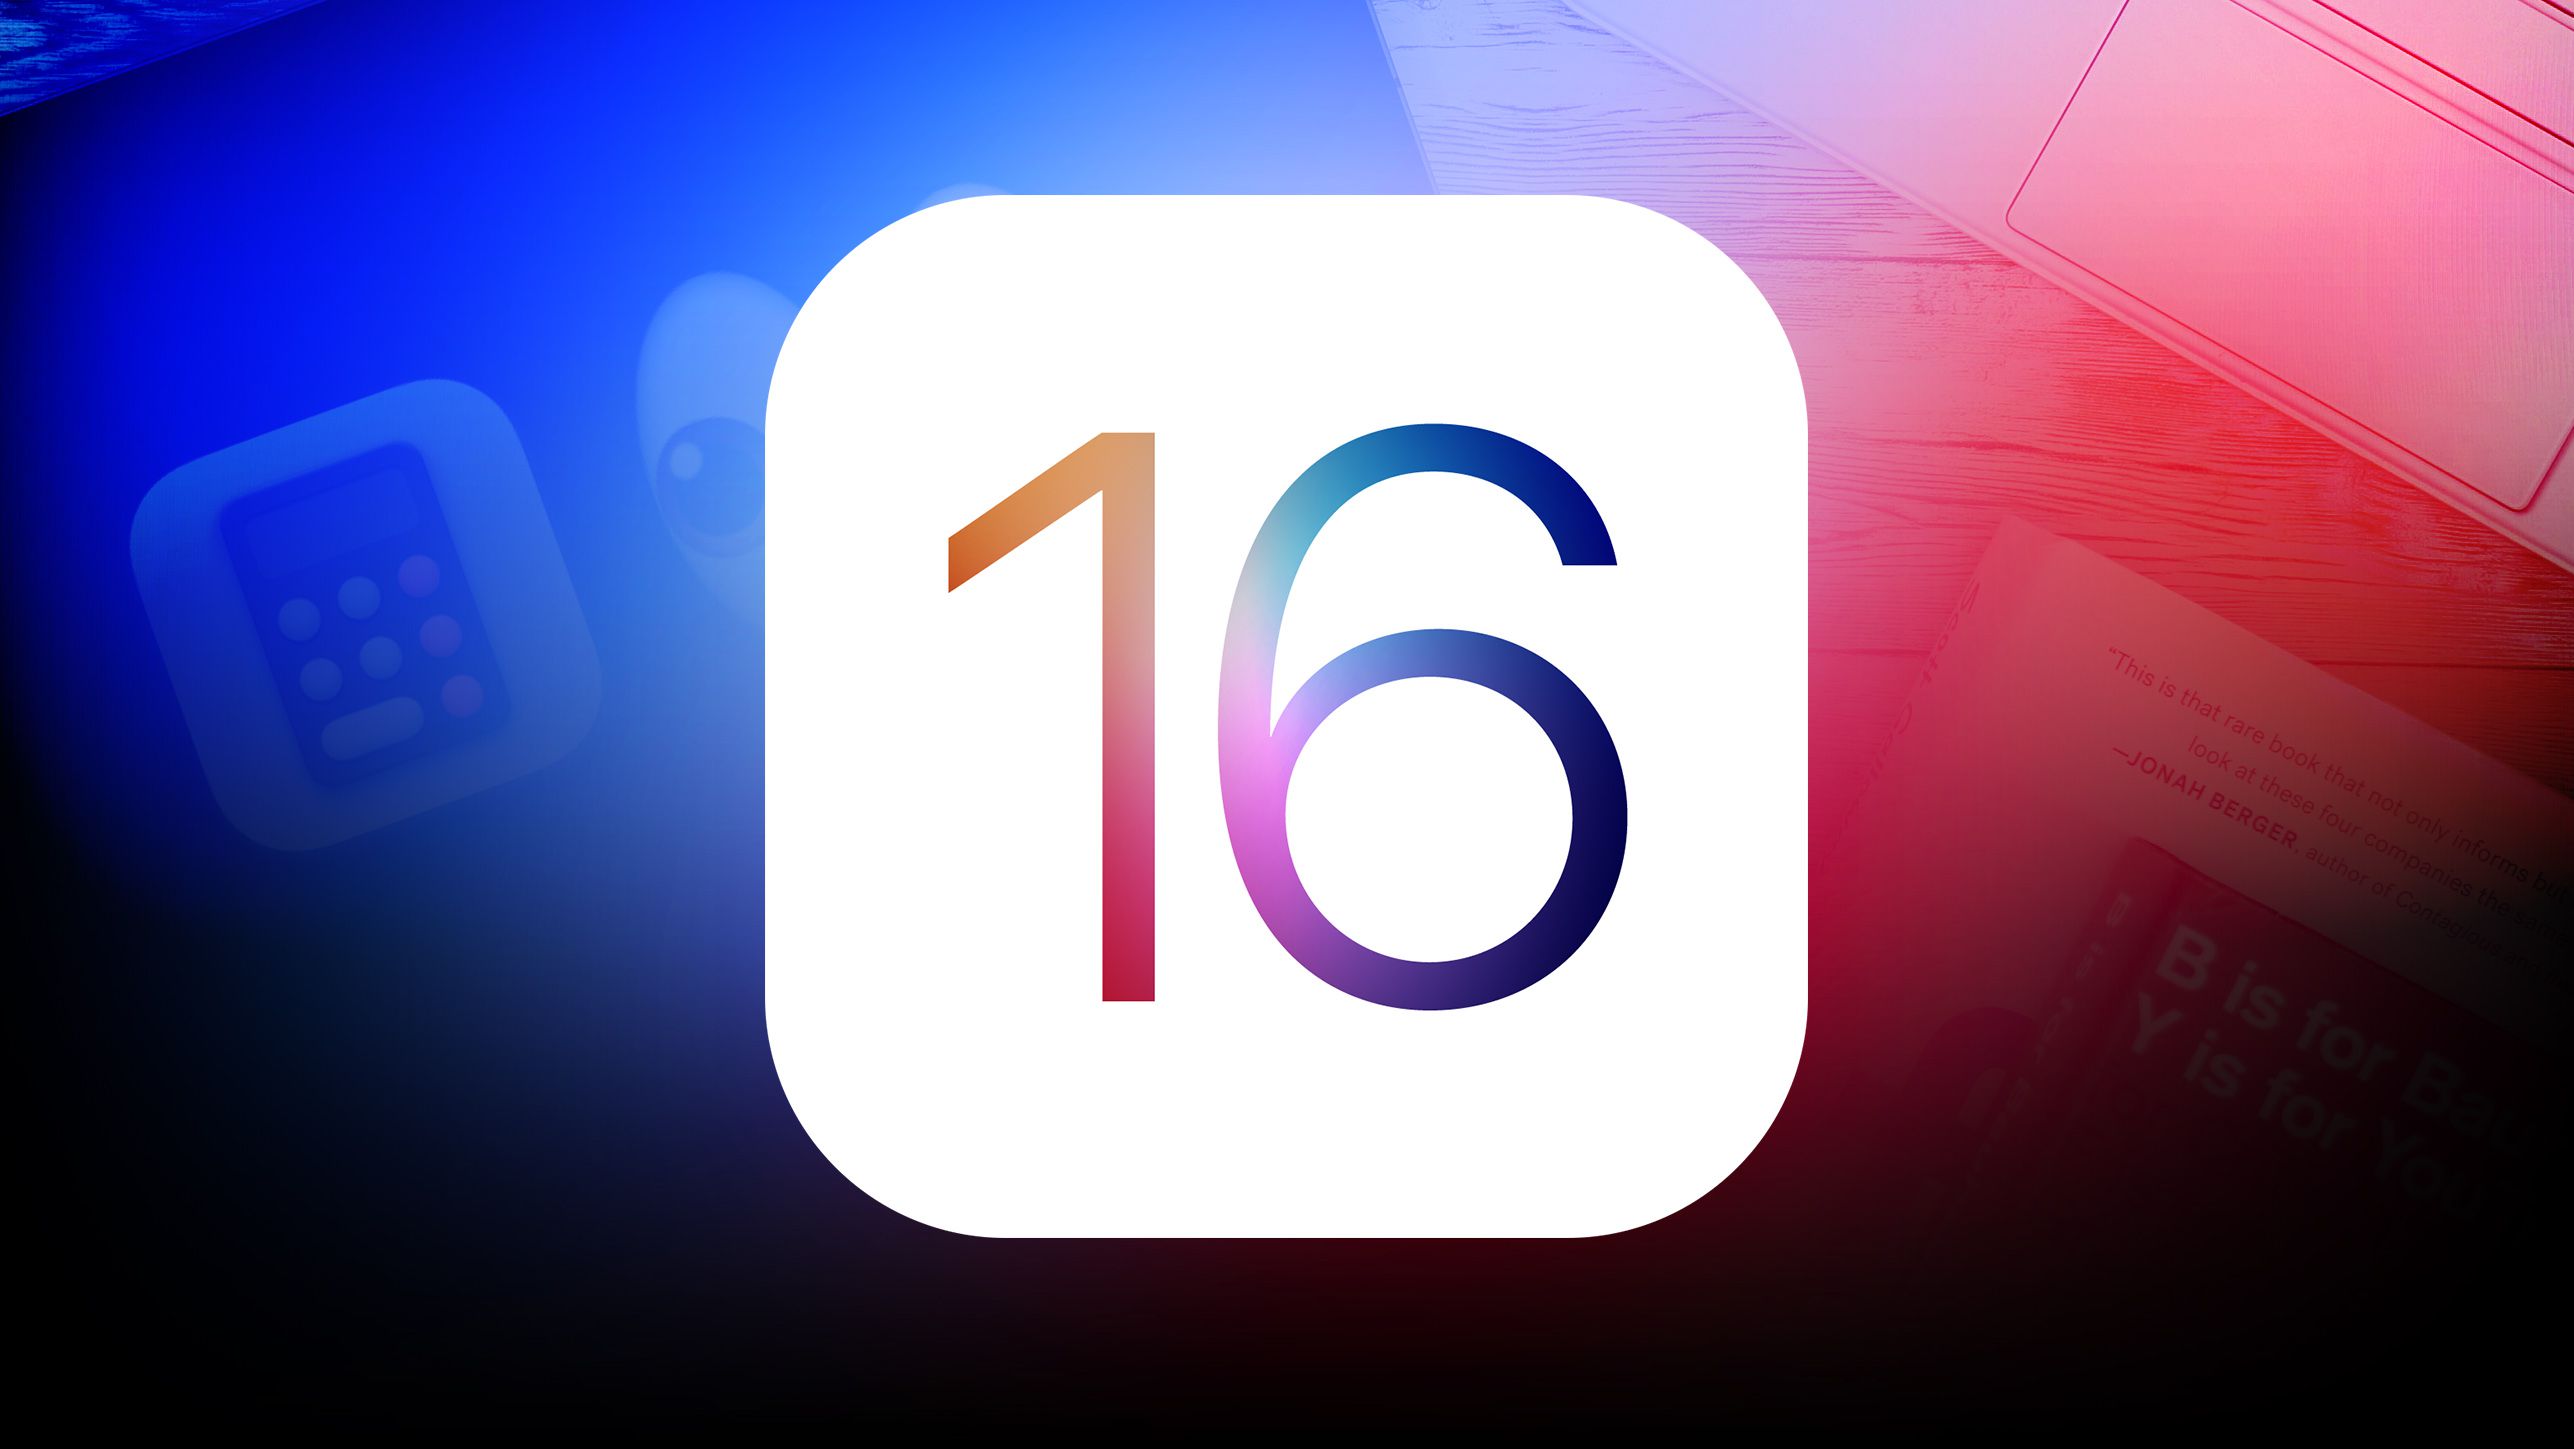 The first public beta of iOS 16 expected in July will coincide with the third developer beta